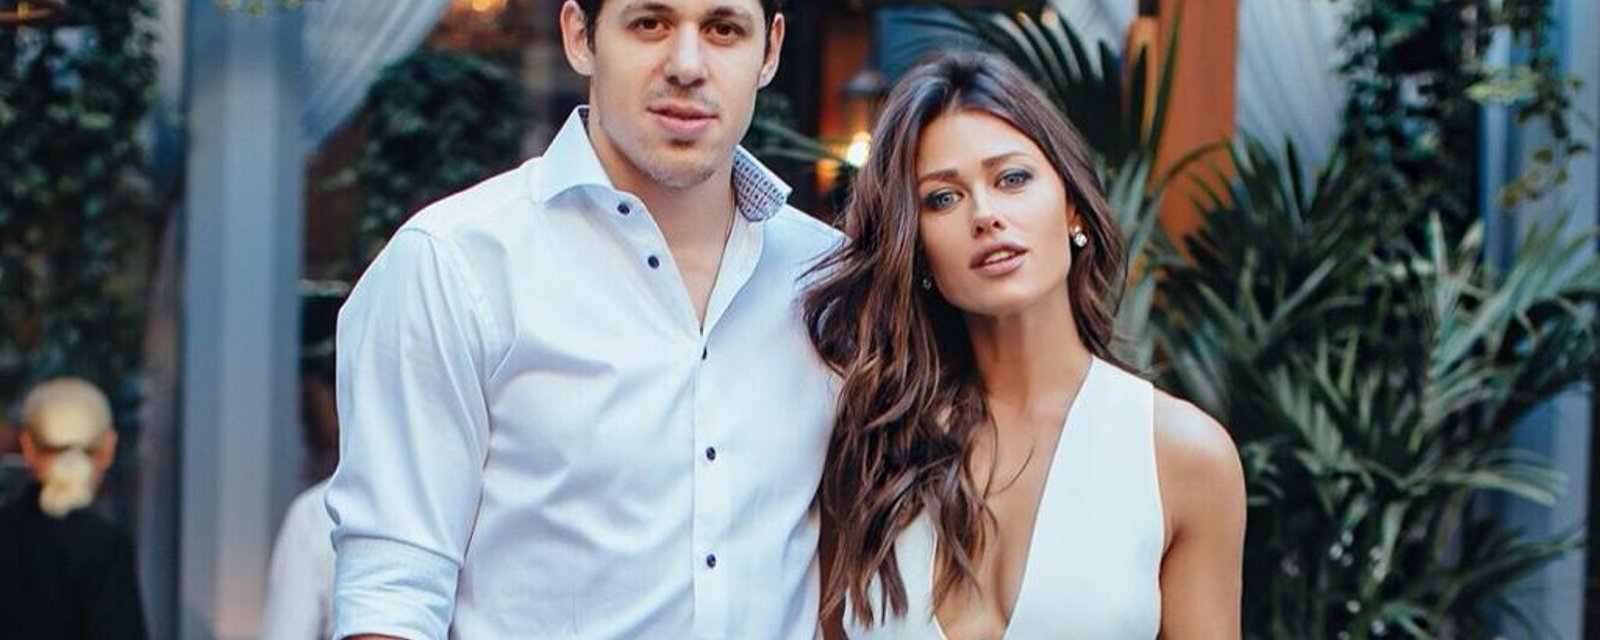 Evgeni Malkin’s wife wants him to leave the Penguins!